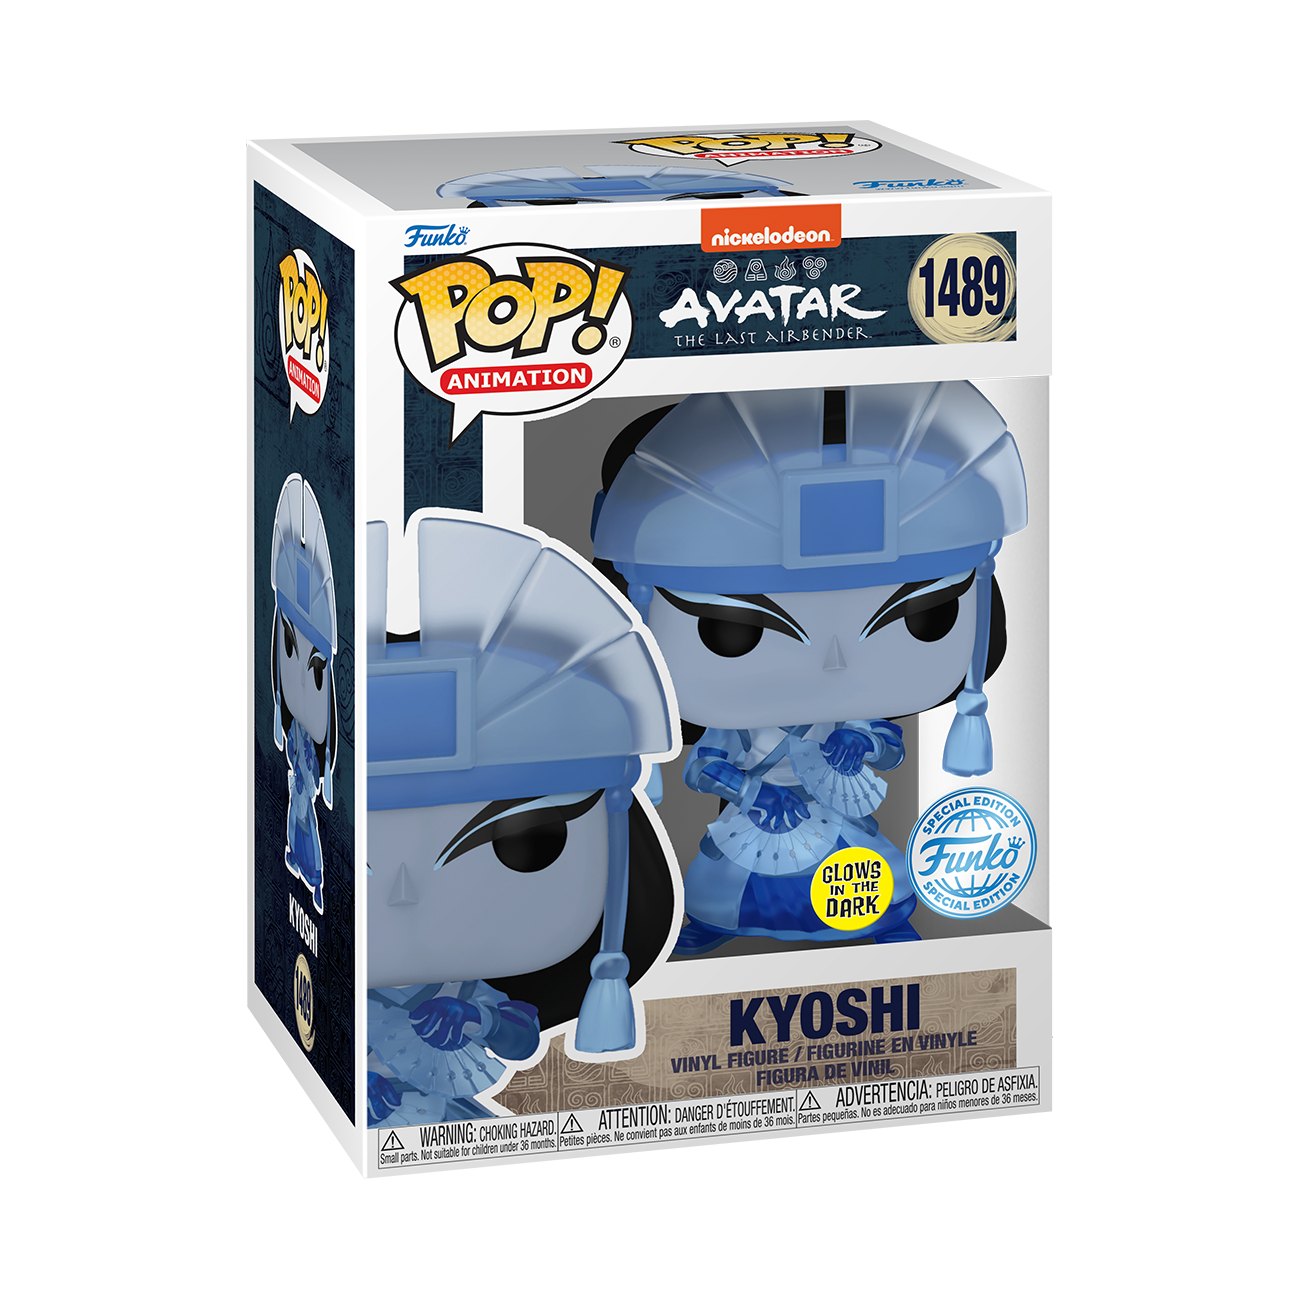 Pop! Avatar: The Last Airbender Puzzle